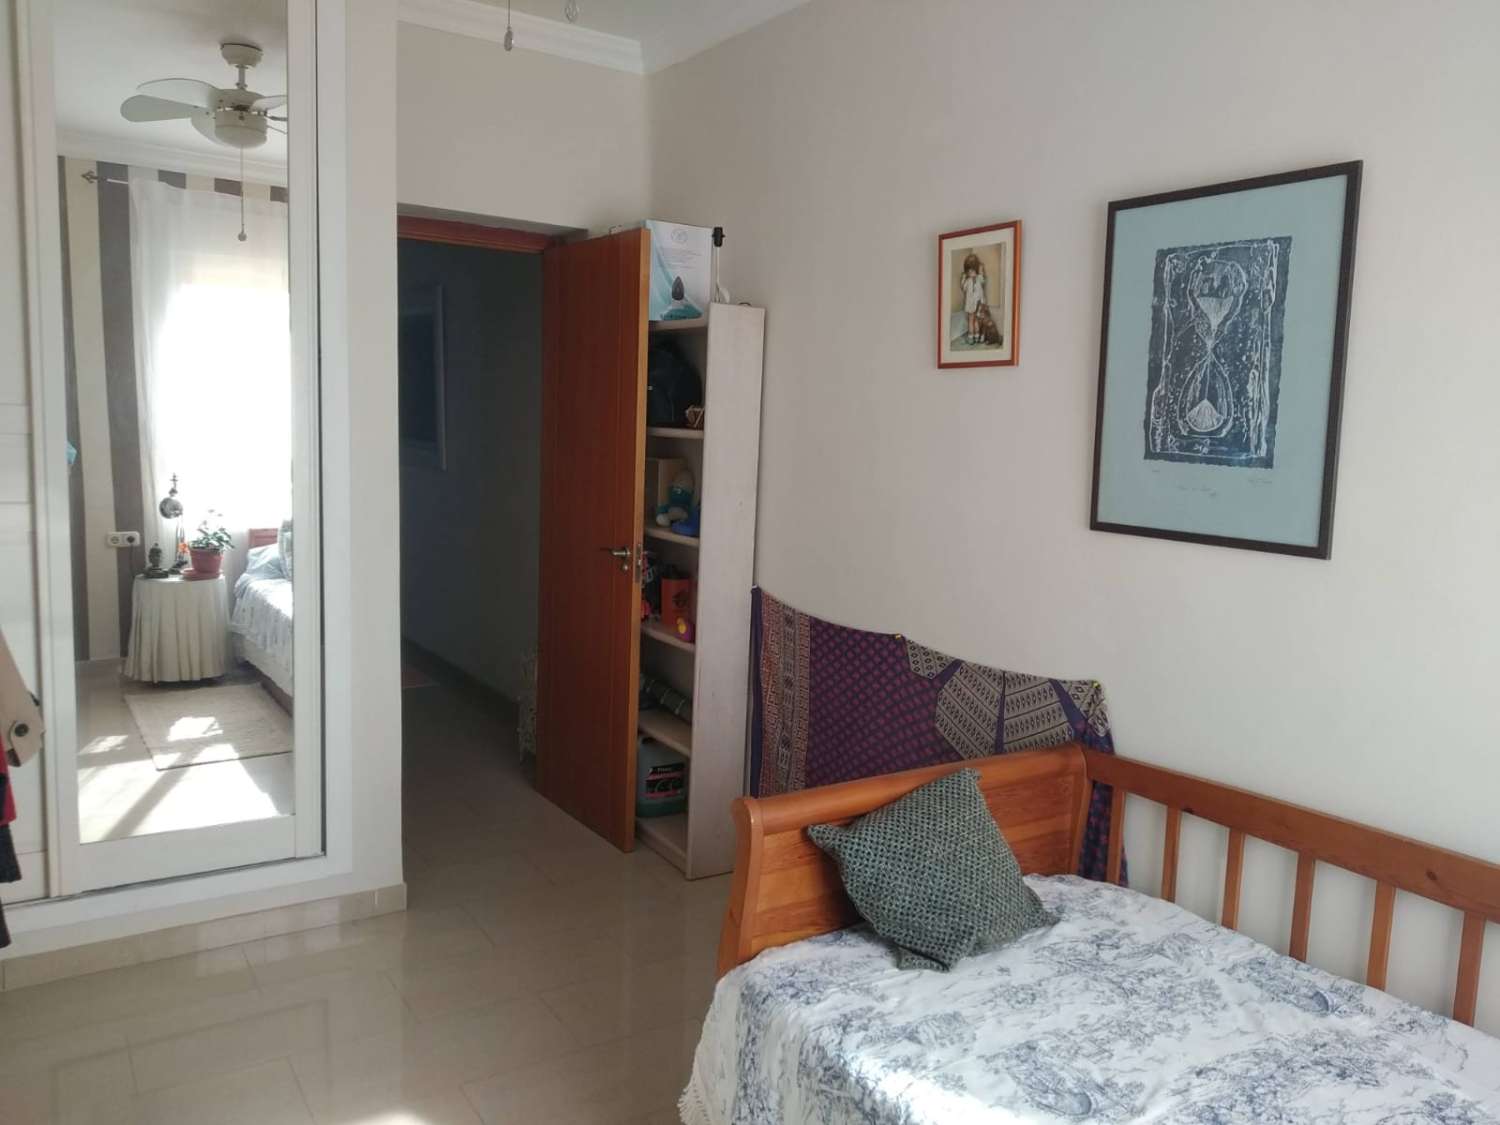 FLAT FOR SALE IN MALAGUETA WITH VIEWS TO GIBRALFARO. PARKING INCLUDED IN PRICE